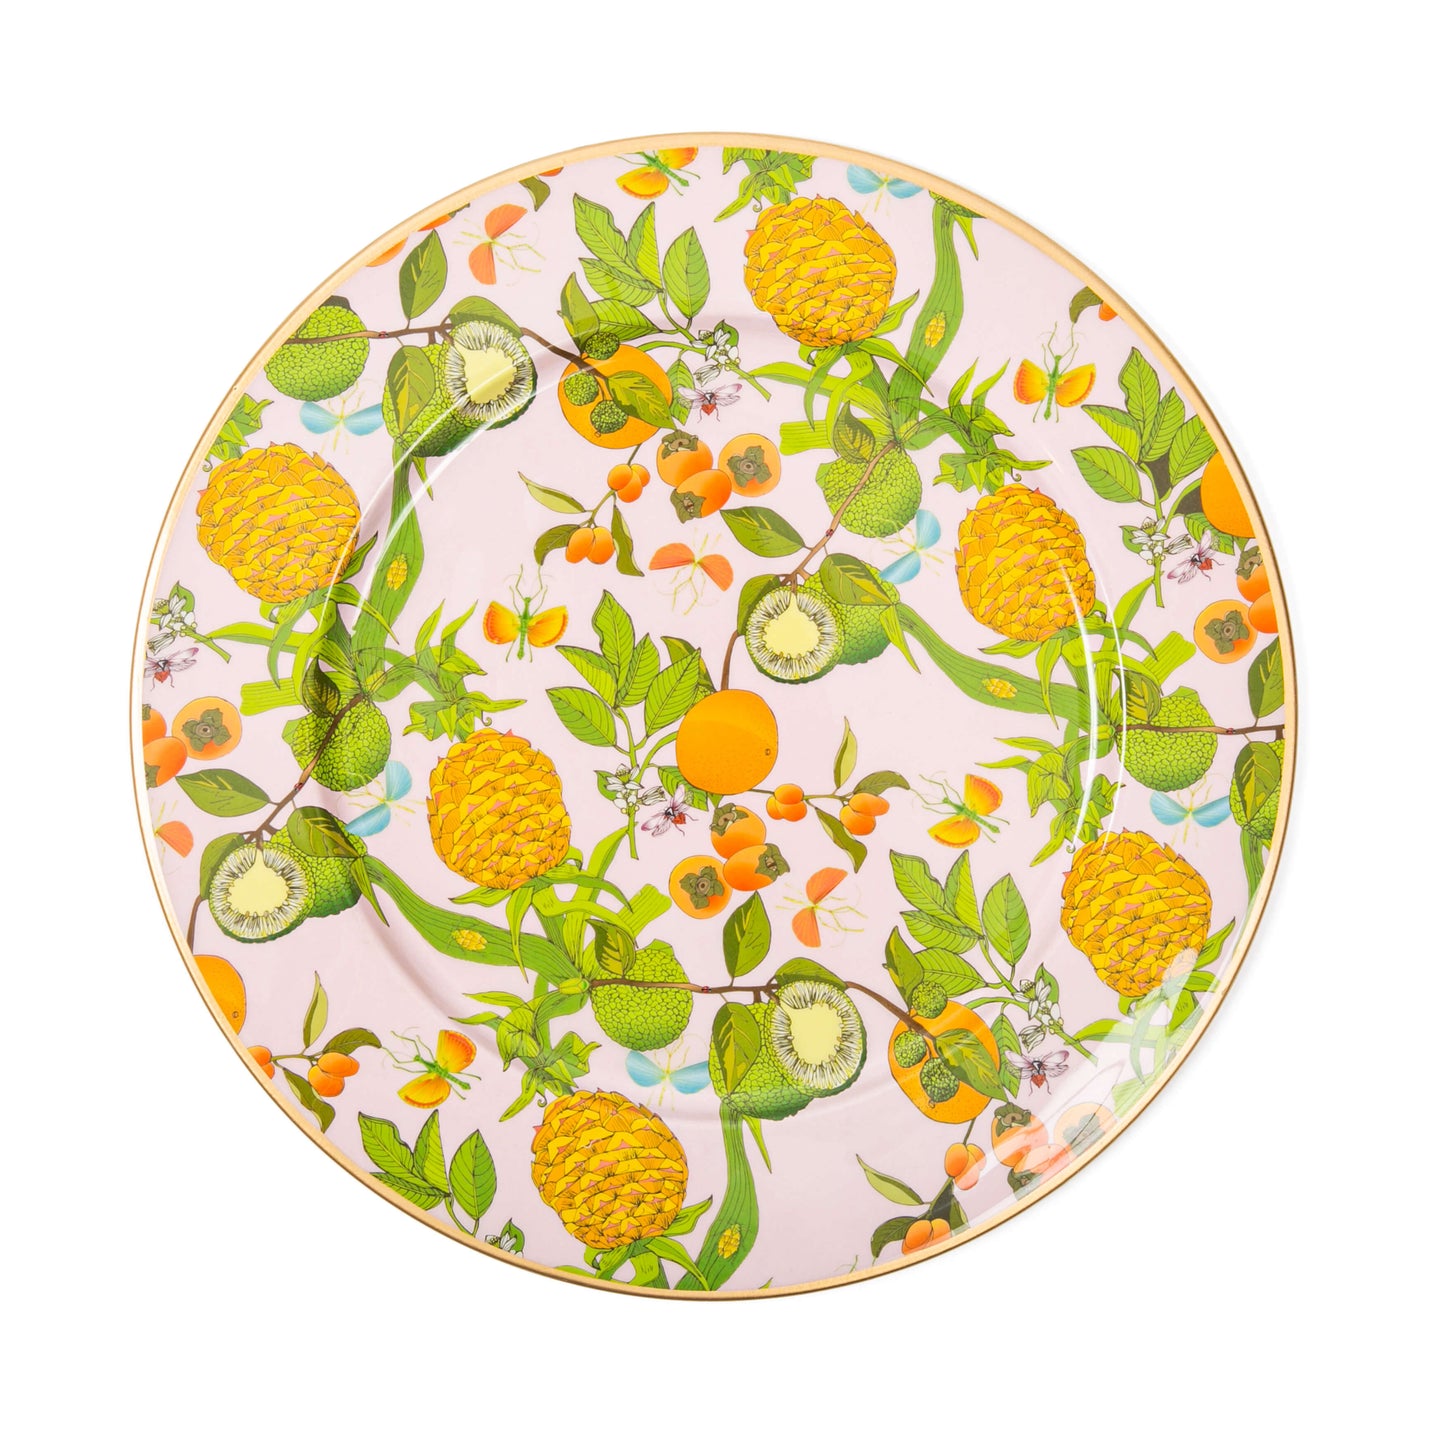 Pineapple Gardens Enameled Charger Plates- Set of 4